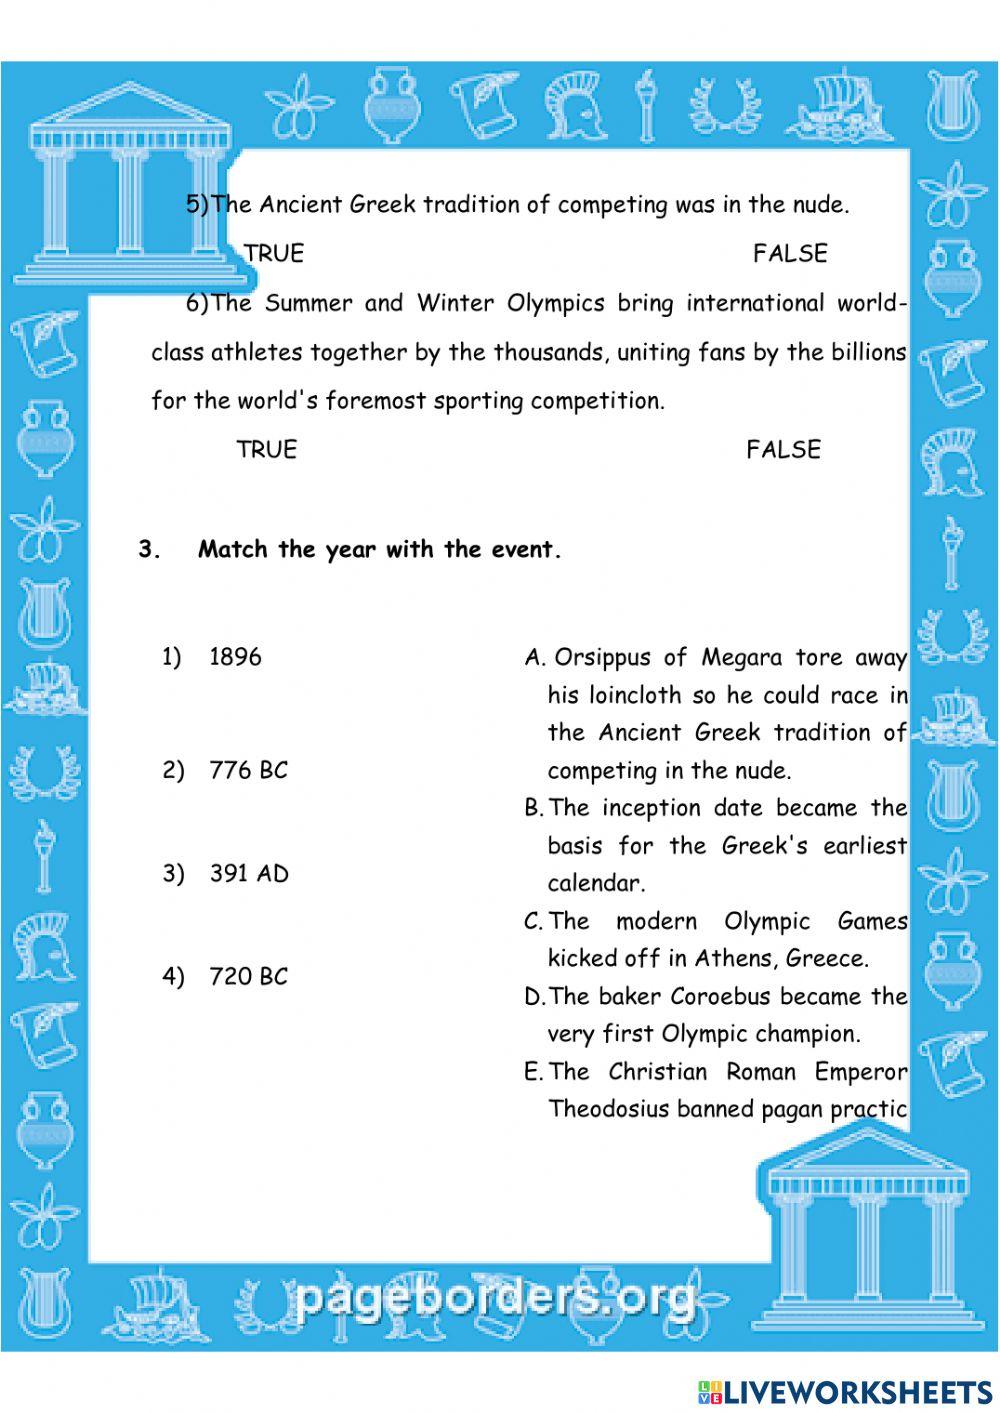 The origin of the Olympic Games